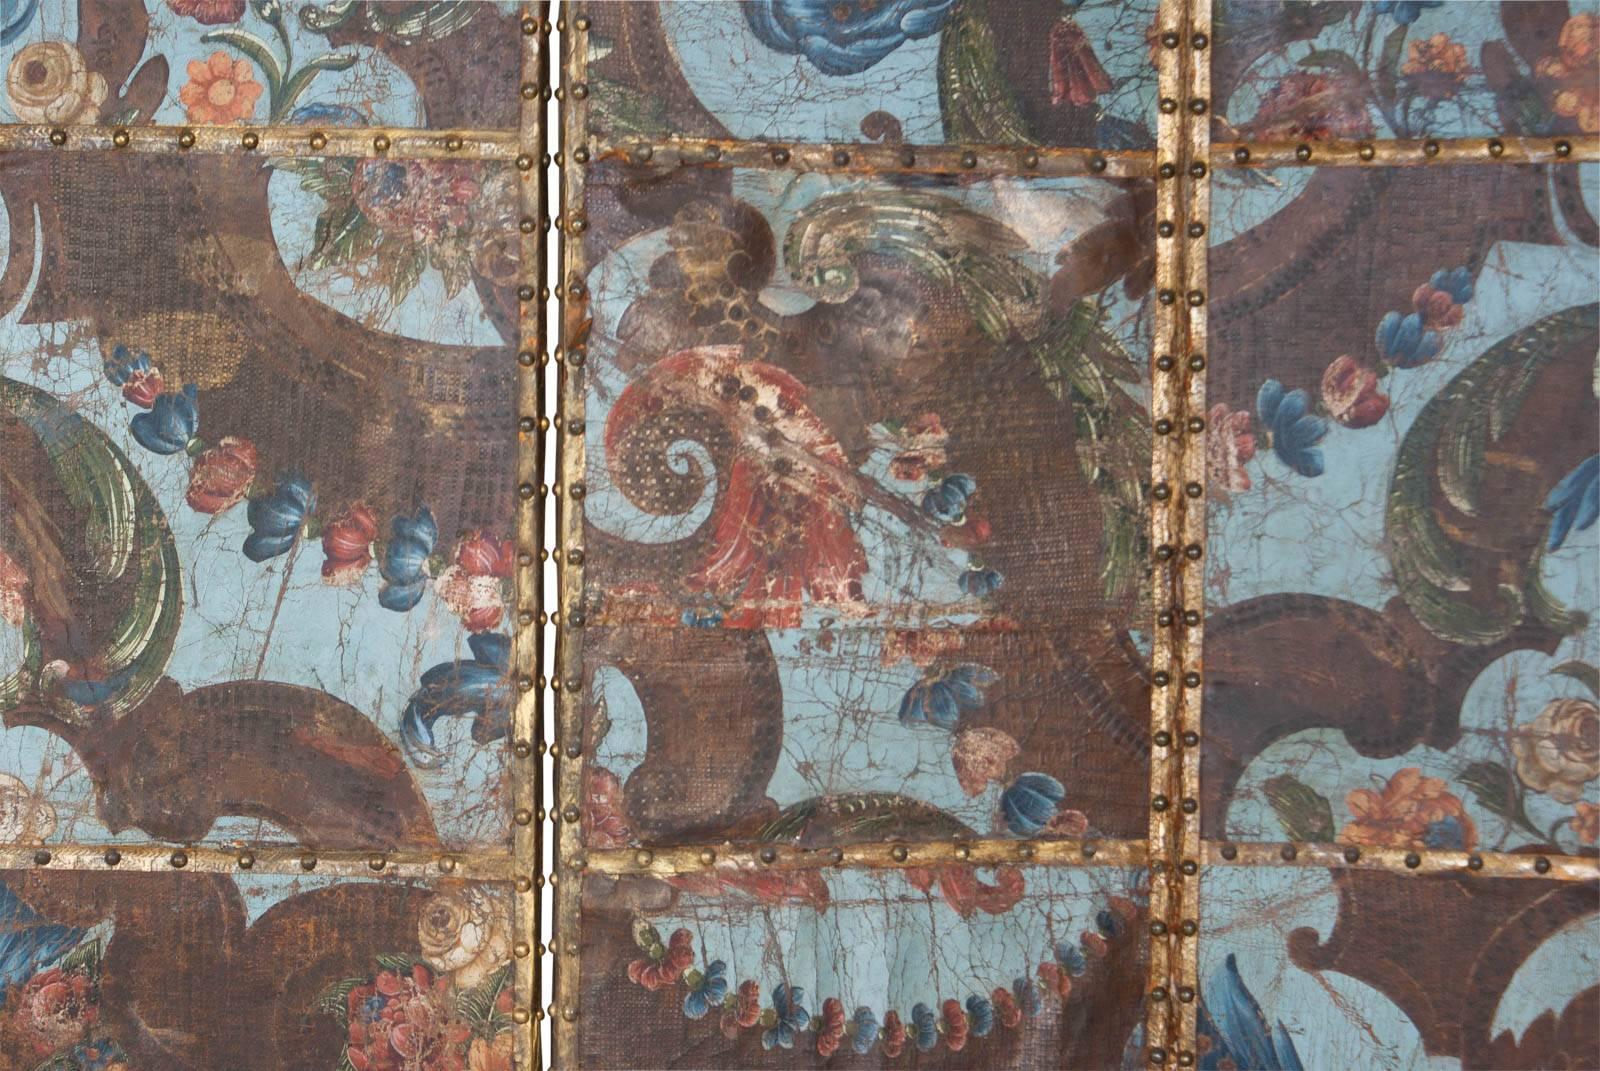 A decorative Spanish tooled leather screen decorated with gilding and paint. The tooled leather is from the 1700s when it was used for covering walls in important homes. The screen frames are often later and where used to re-purpose and conserve